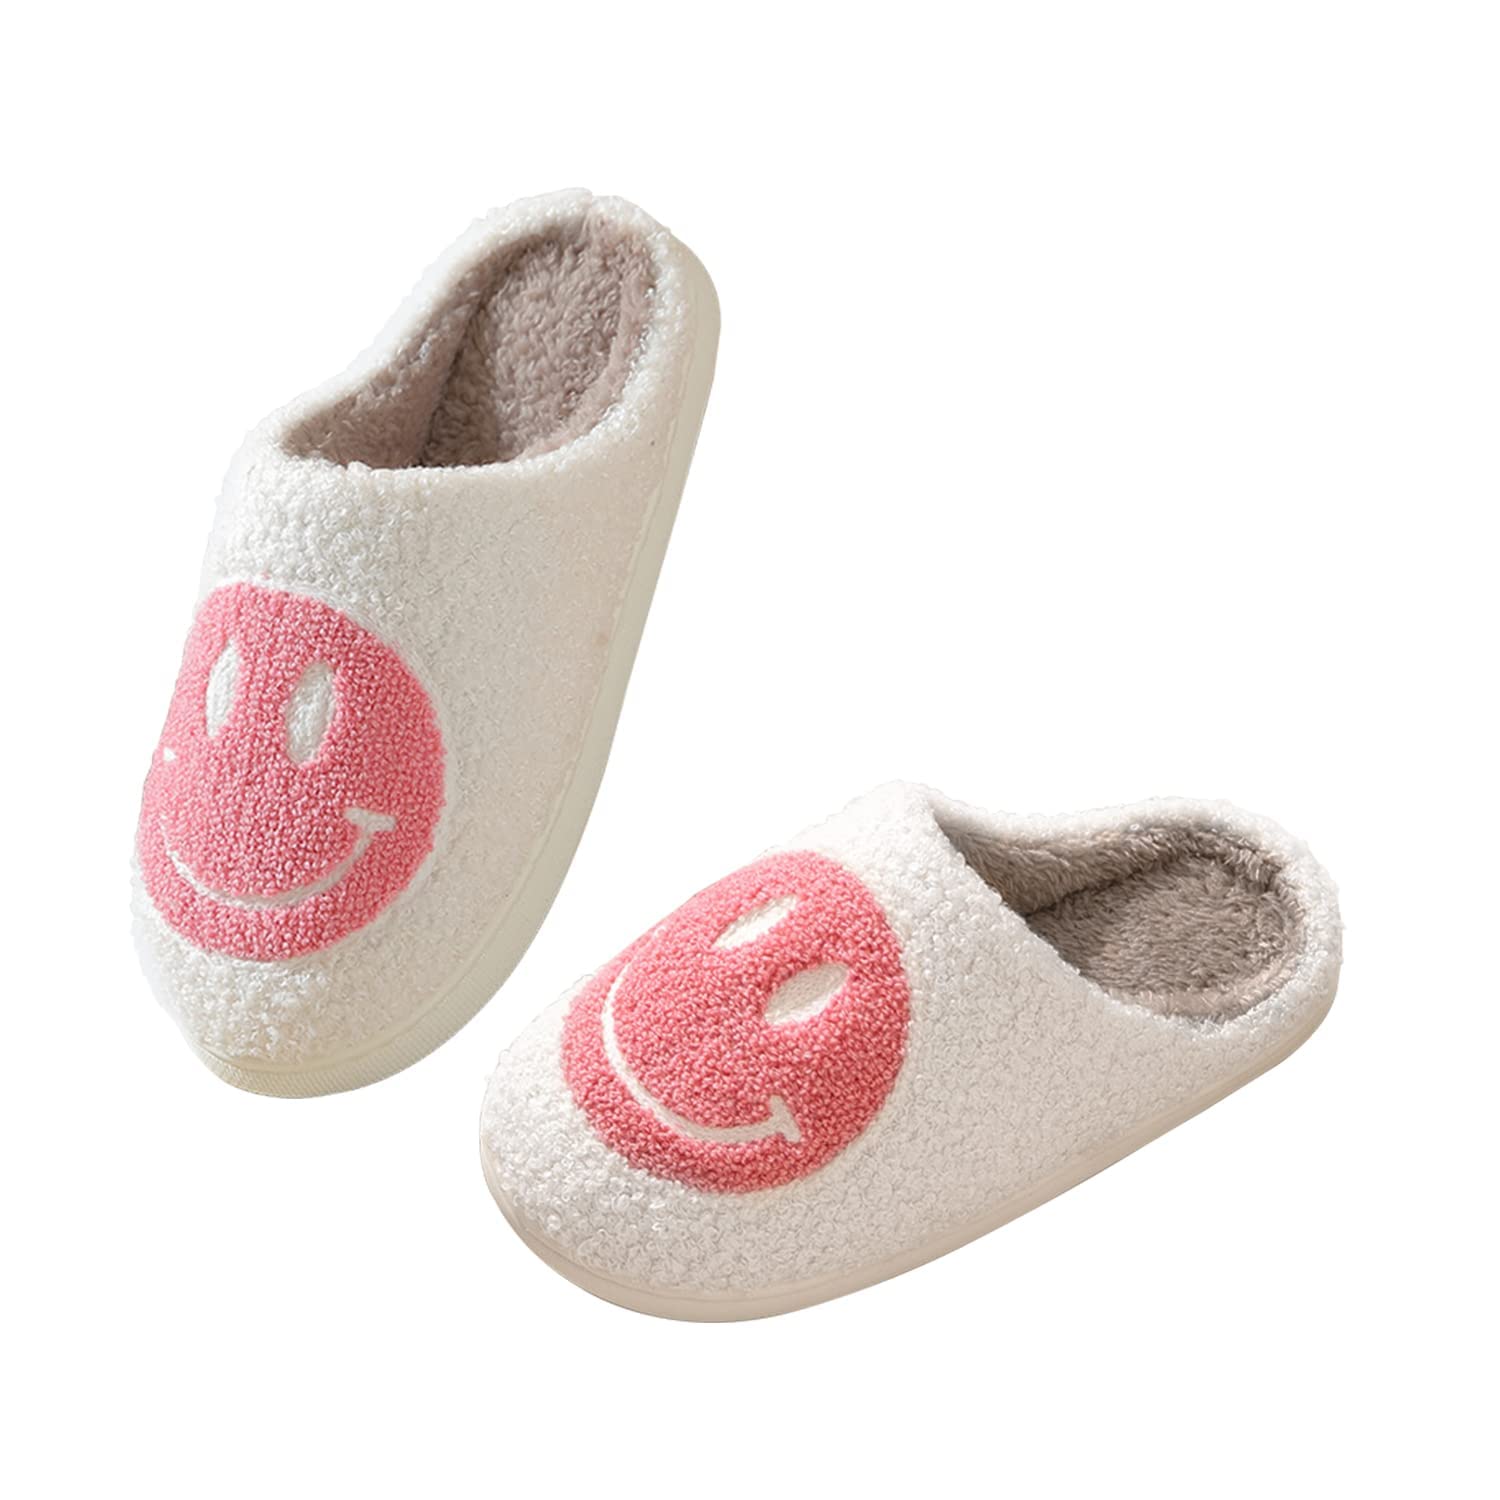 Smile Face Slippers fpr Women Happy face slippers Retro Soft Plush Warm Slip-on Slippers, Cozy Indoor Outdoor Slippers with Memory Foam for Men Women